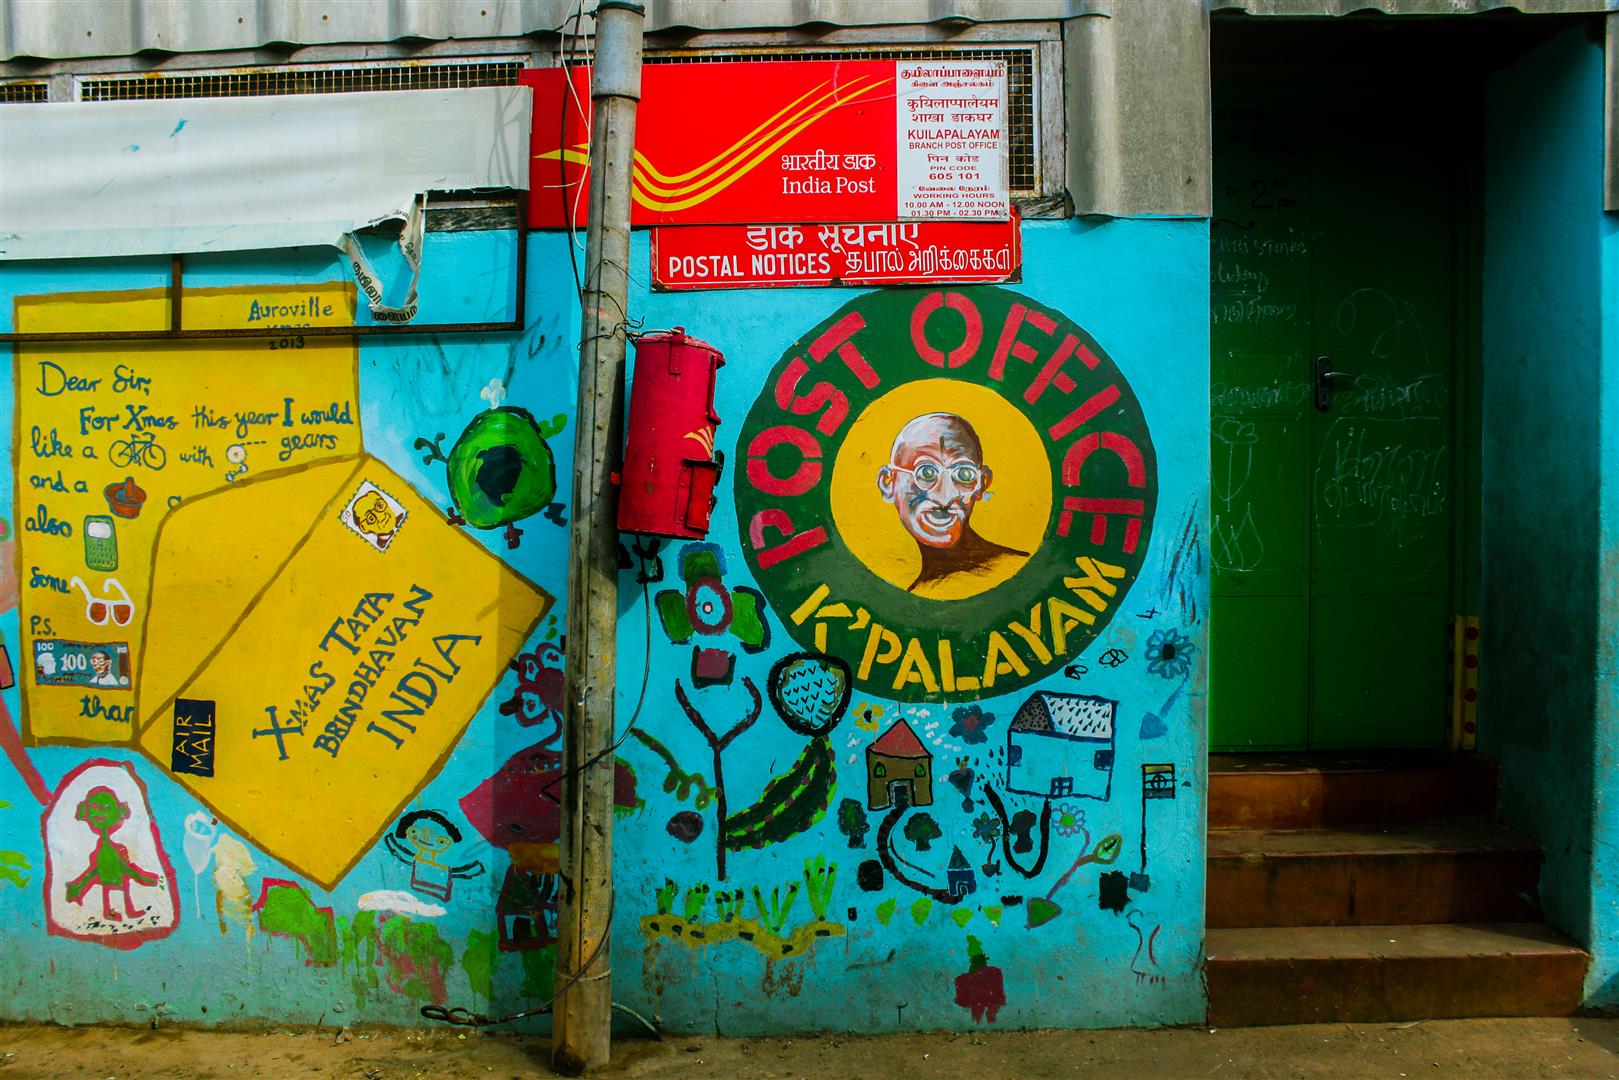 Funkiest post office in India